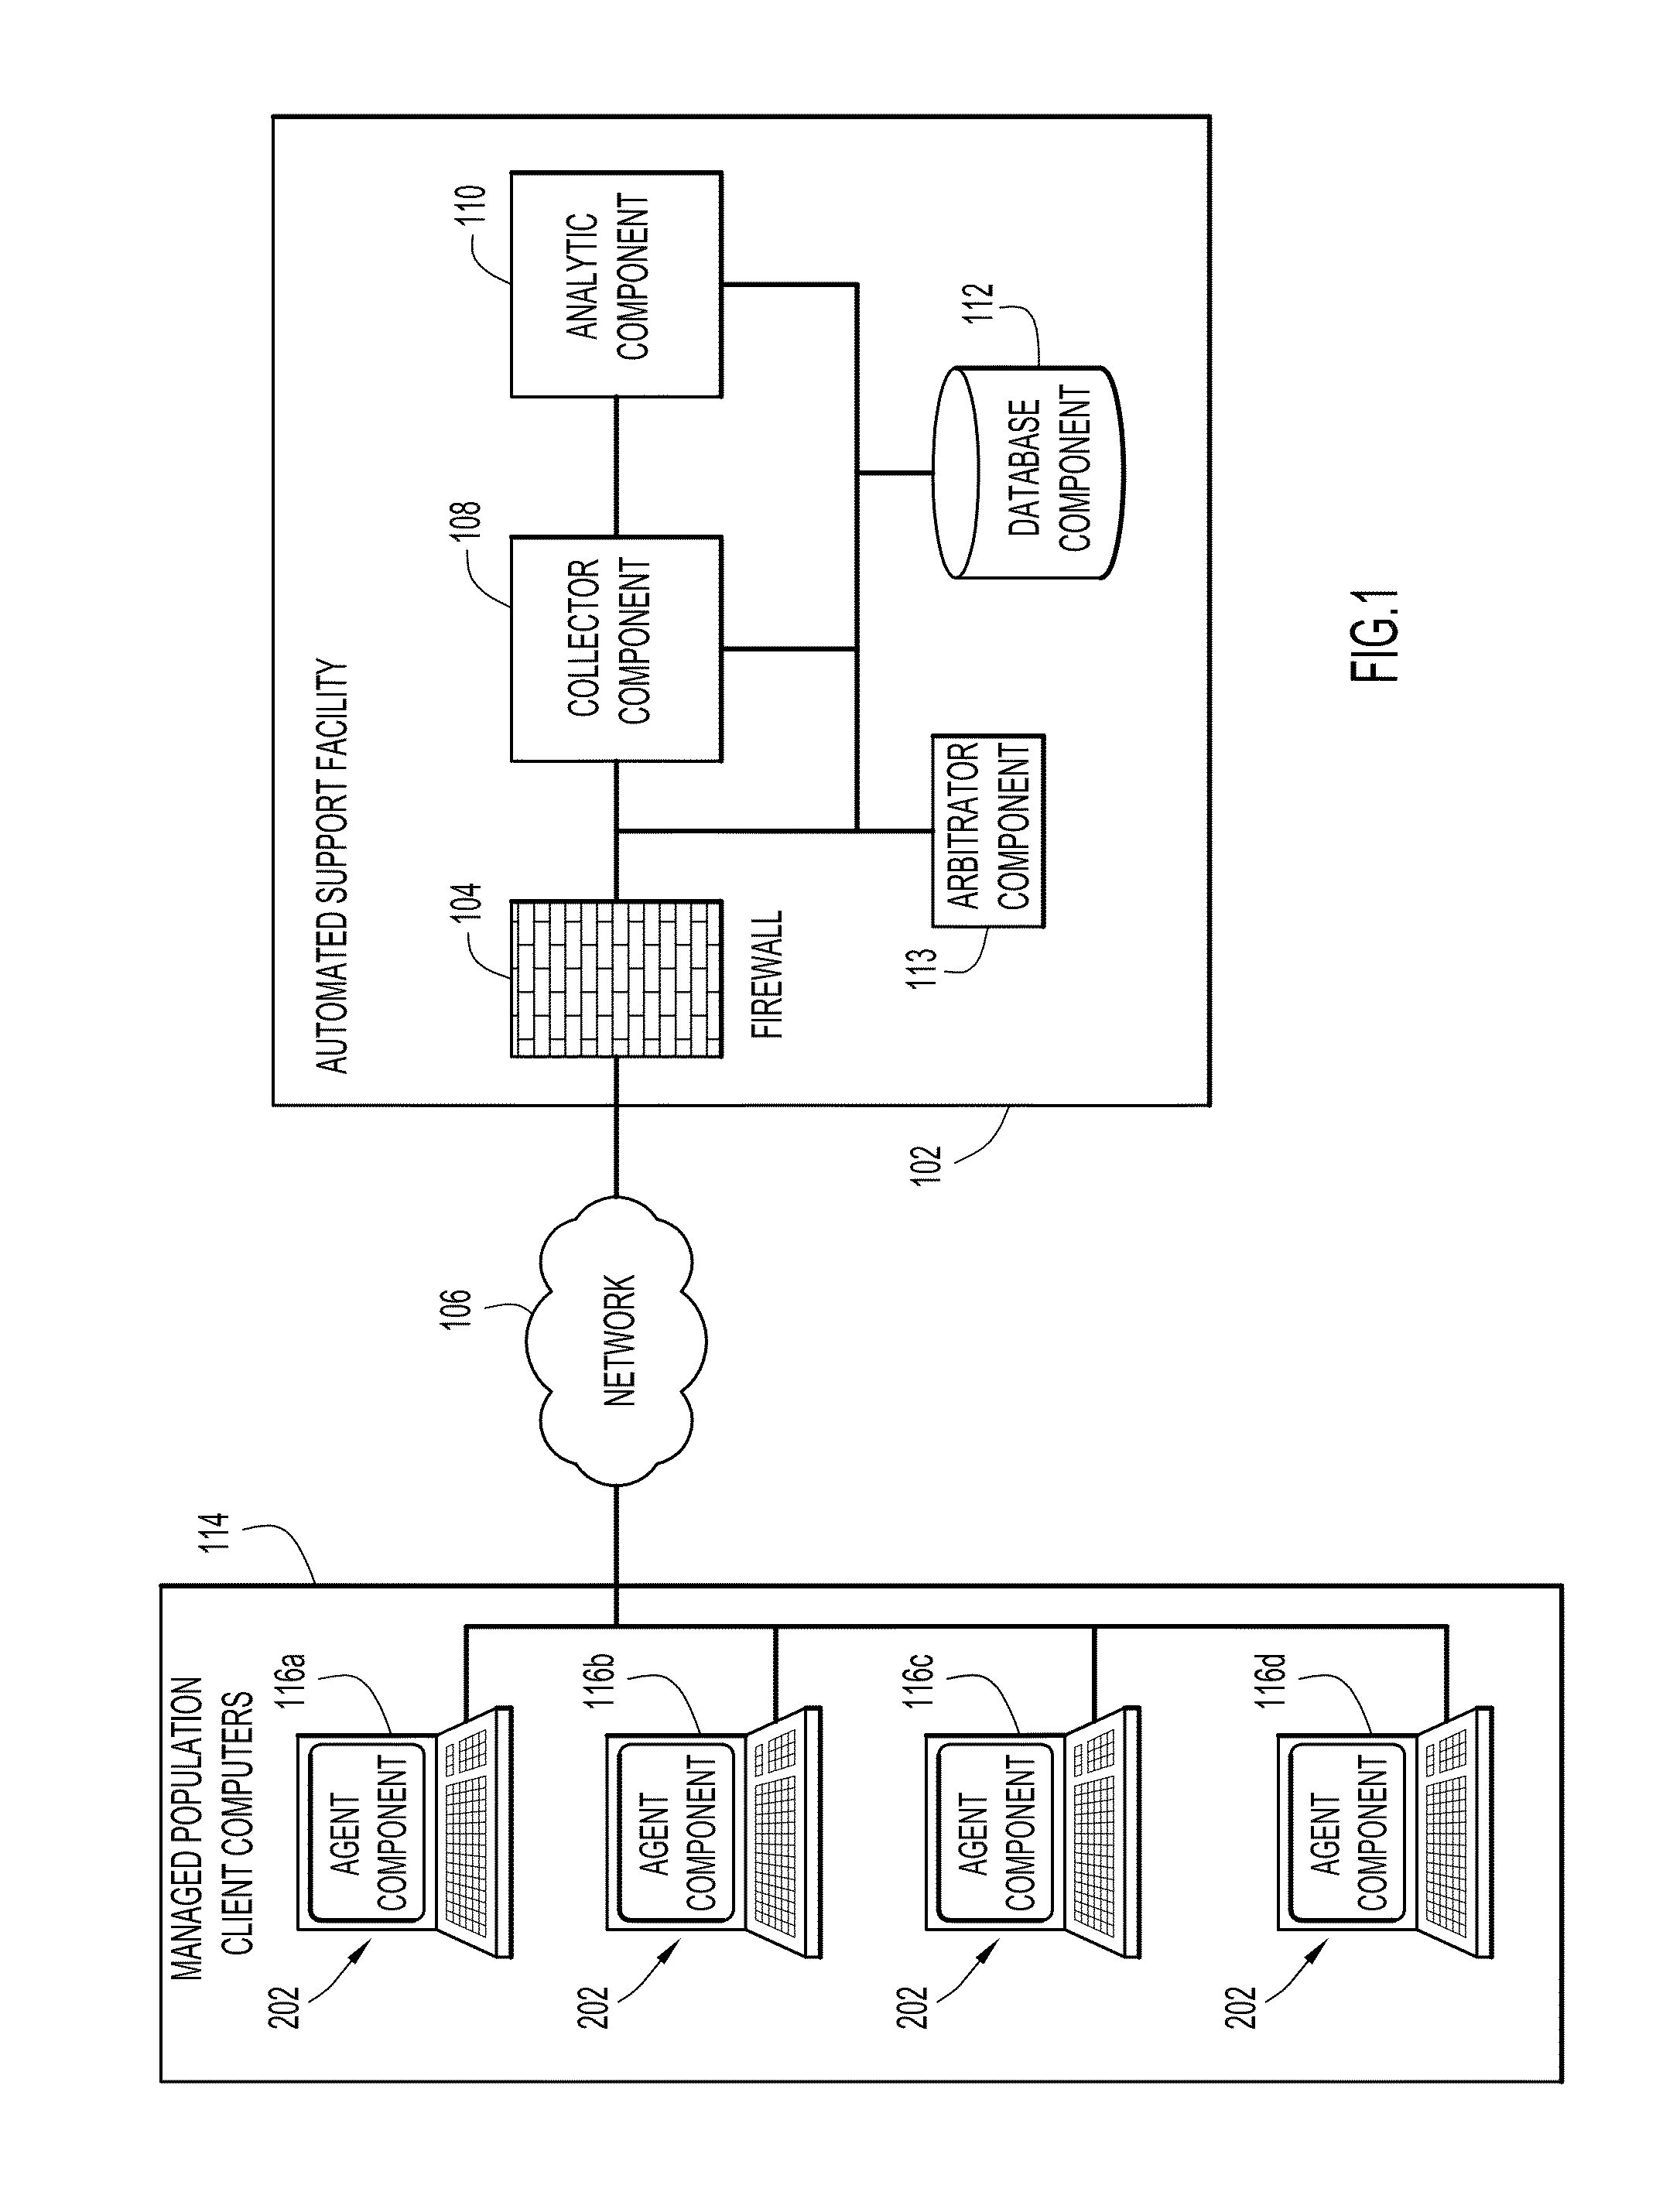 Systems and methods for automated memory and thread execution anomaly detection in a computer network